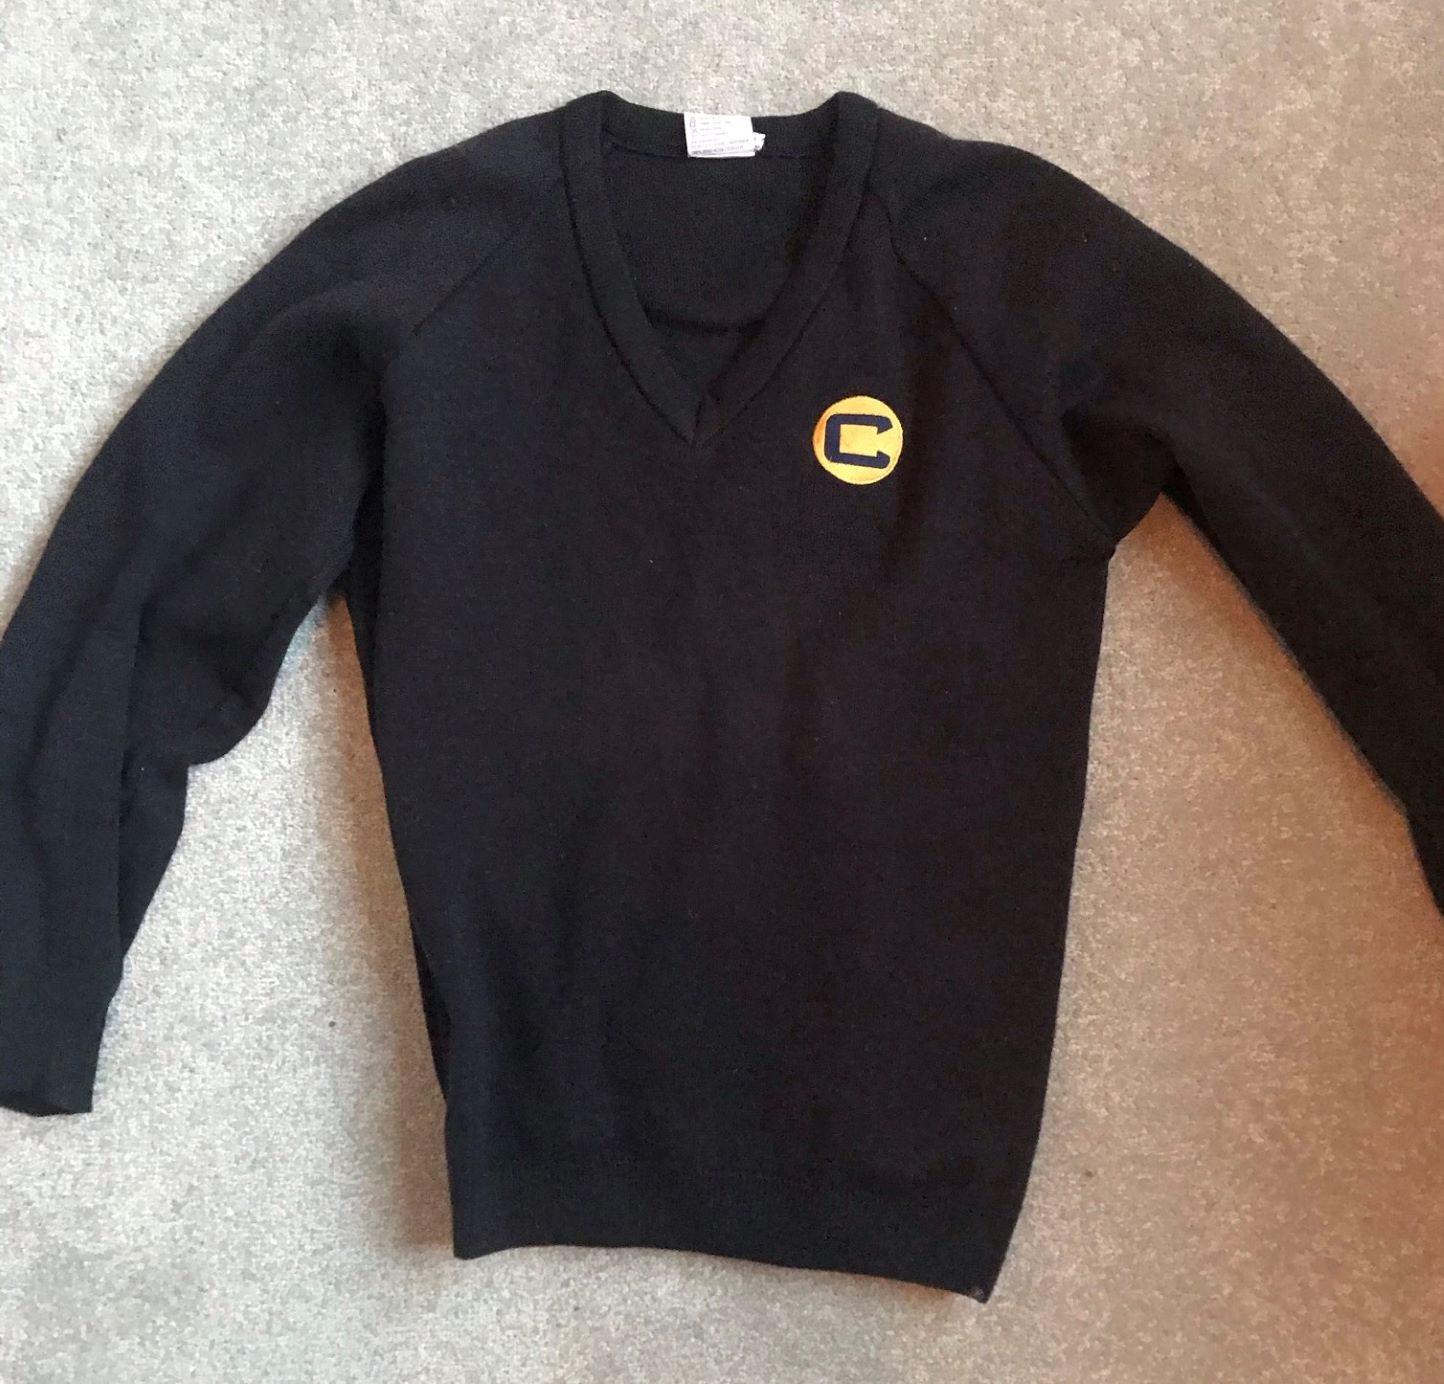 Charter North Jumper: Size 32 (Marked)